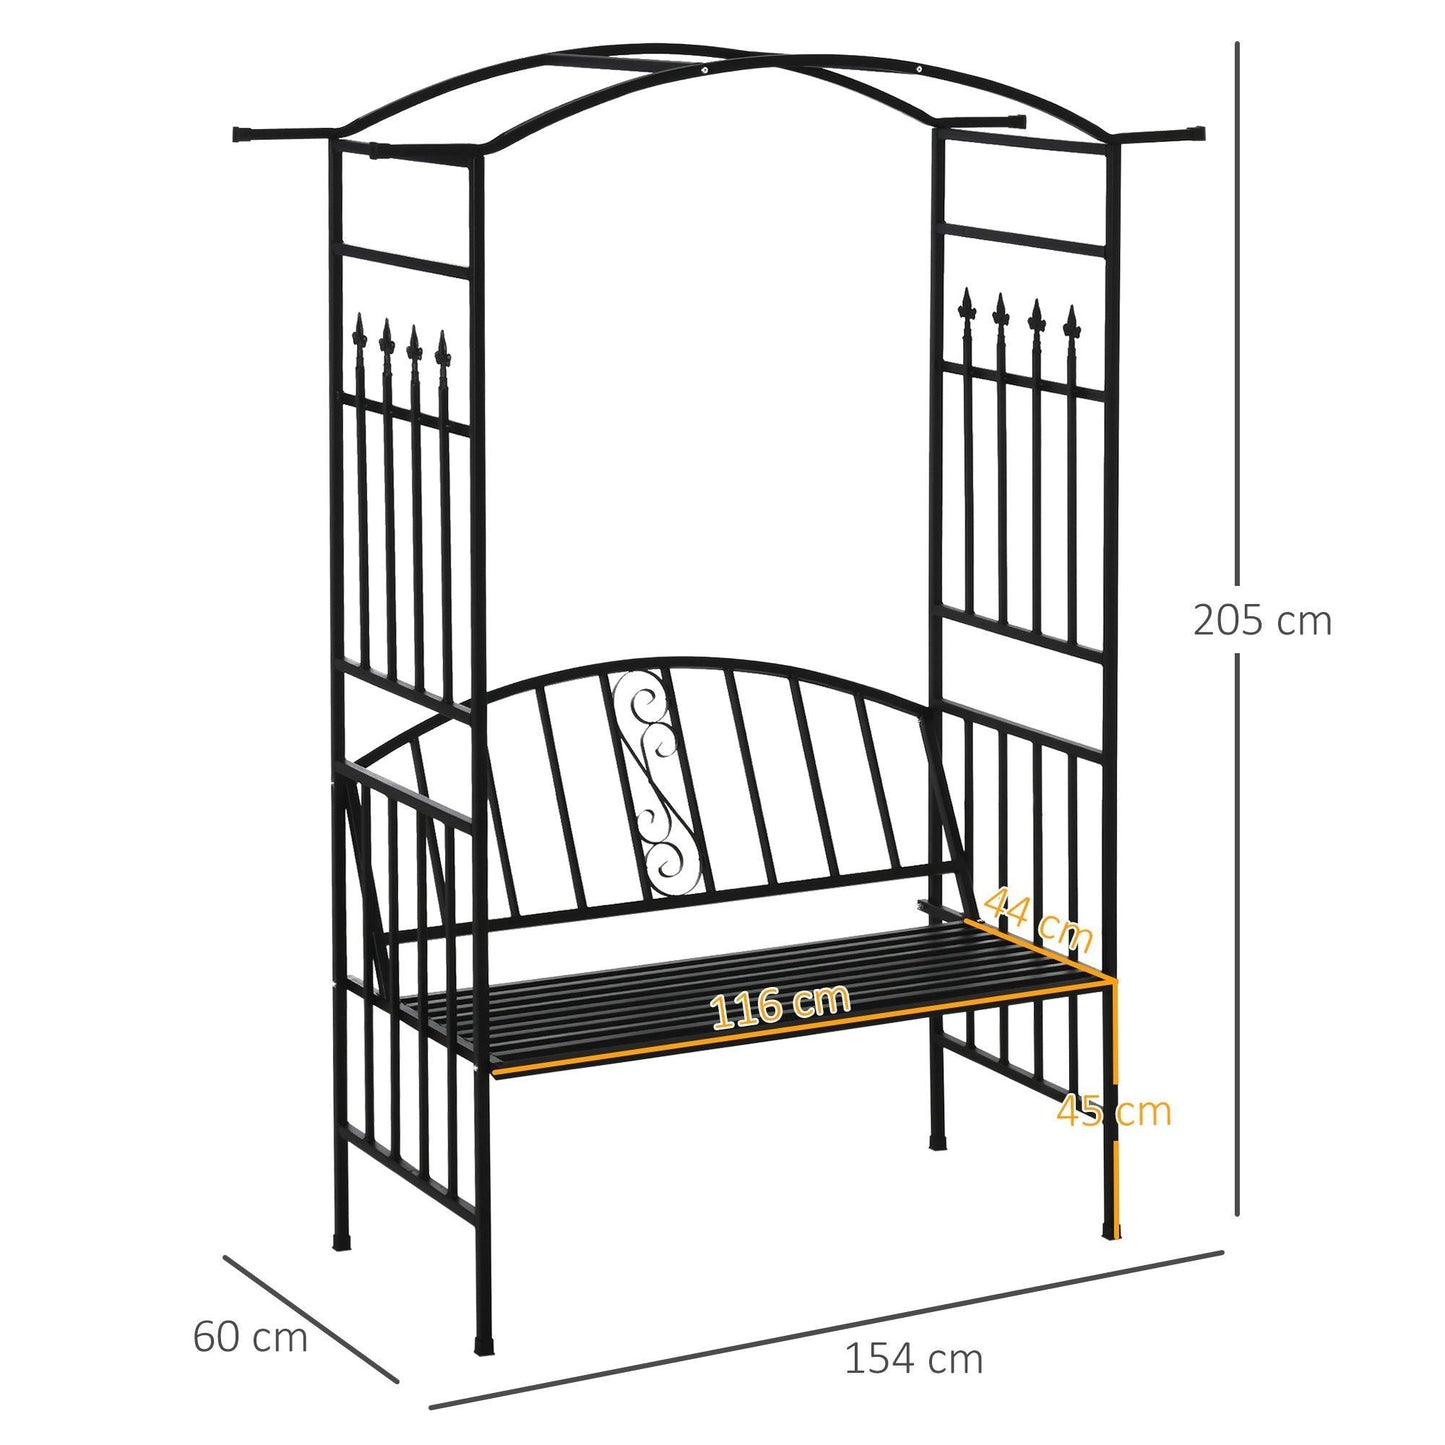 Outsunny Metal Garden Arch Arbour with Bench - Elegant Outdoor Seating - ALL4U RETAILER LTD